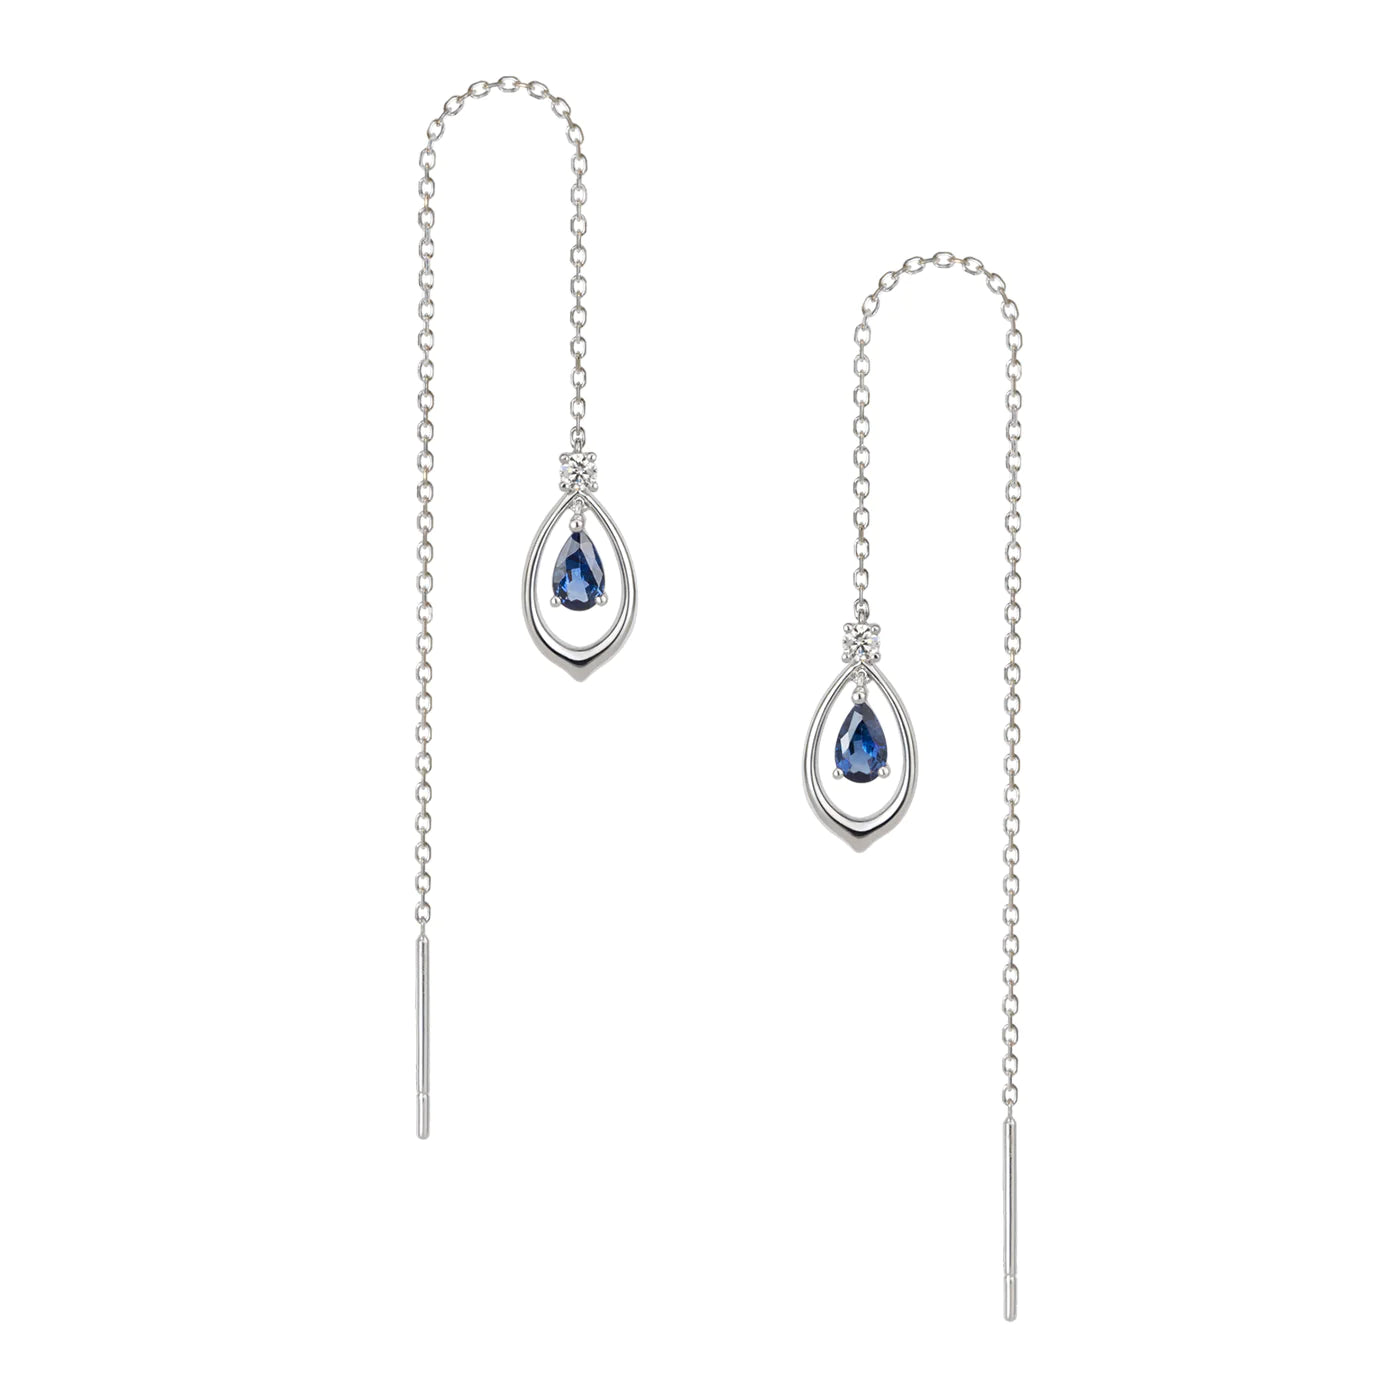 The Heavenly Phoenix Earrings 18kt White Gold with Sapphire